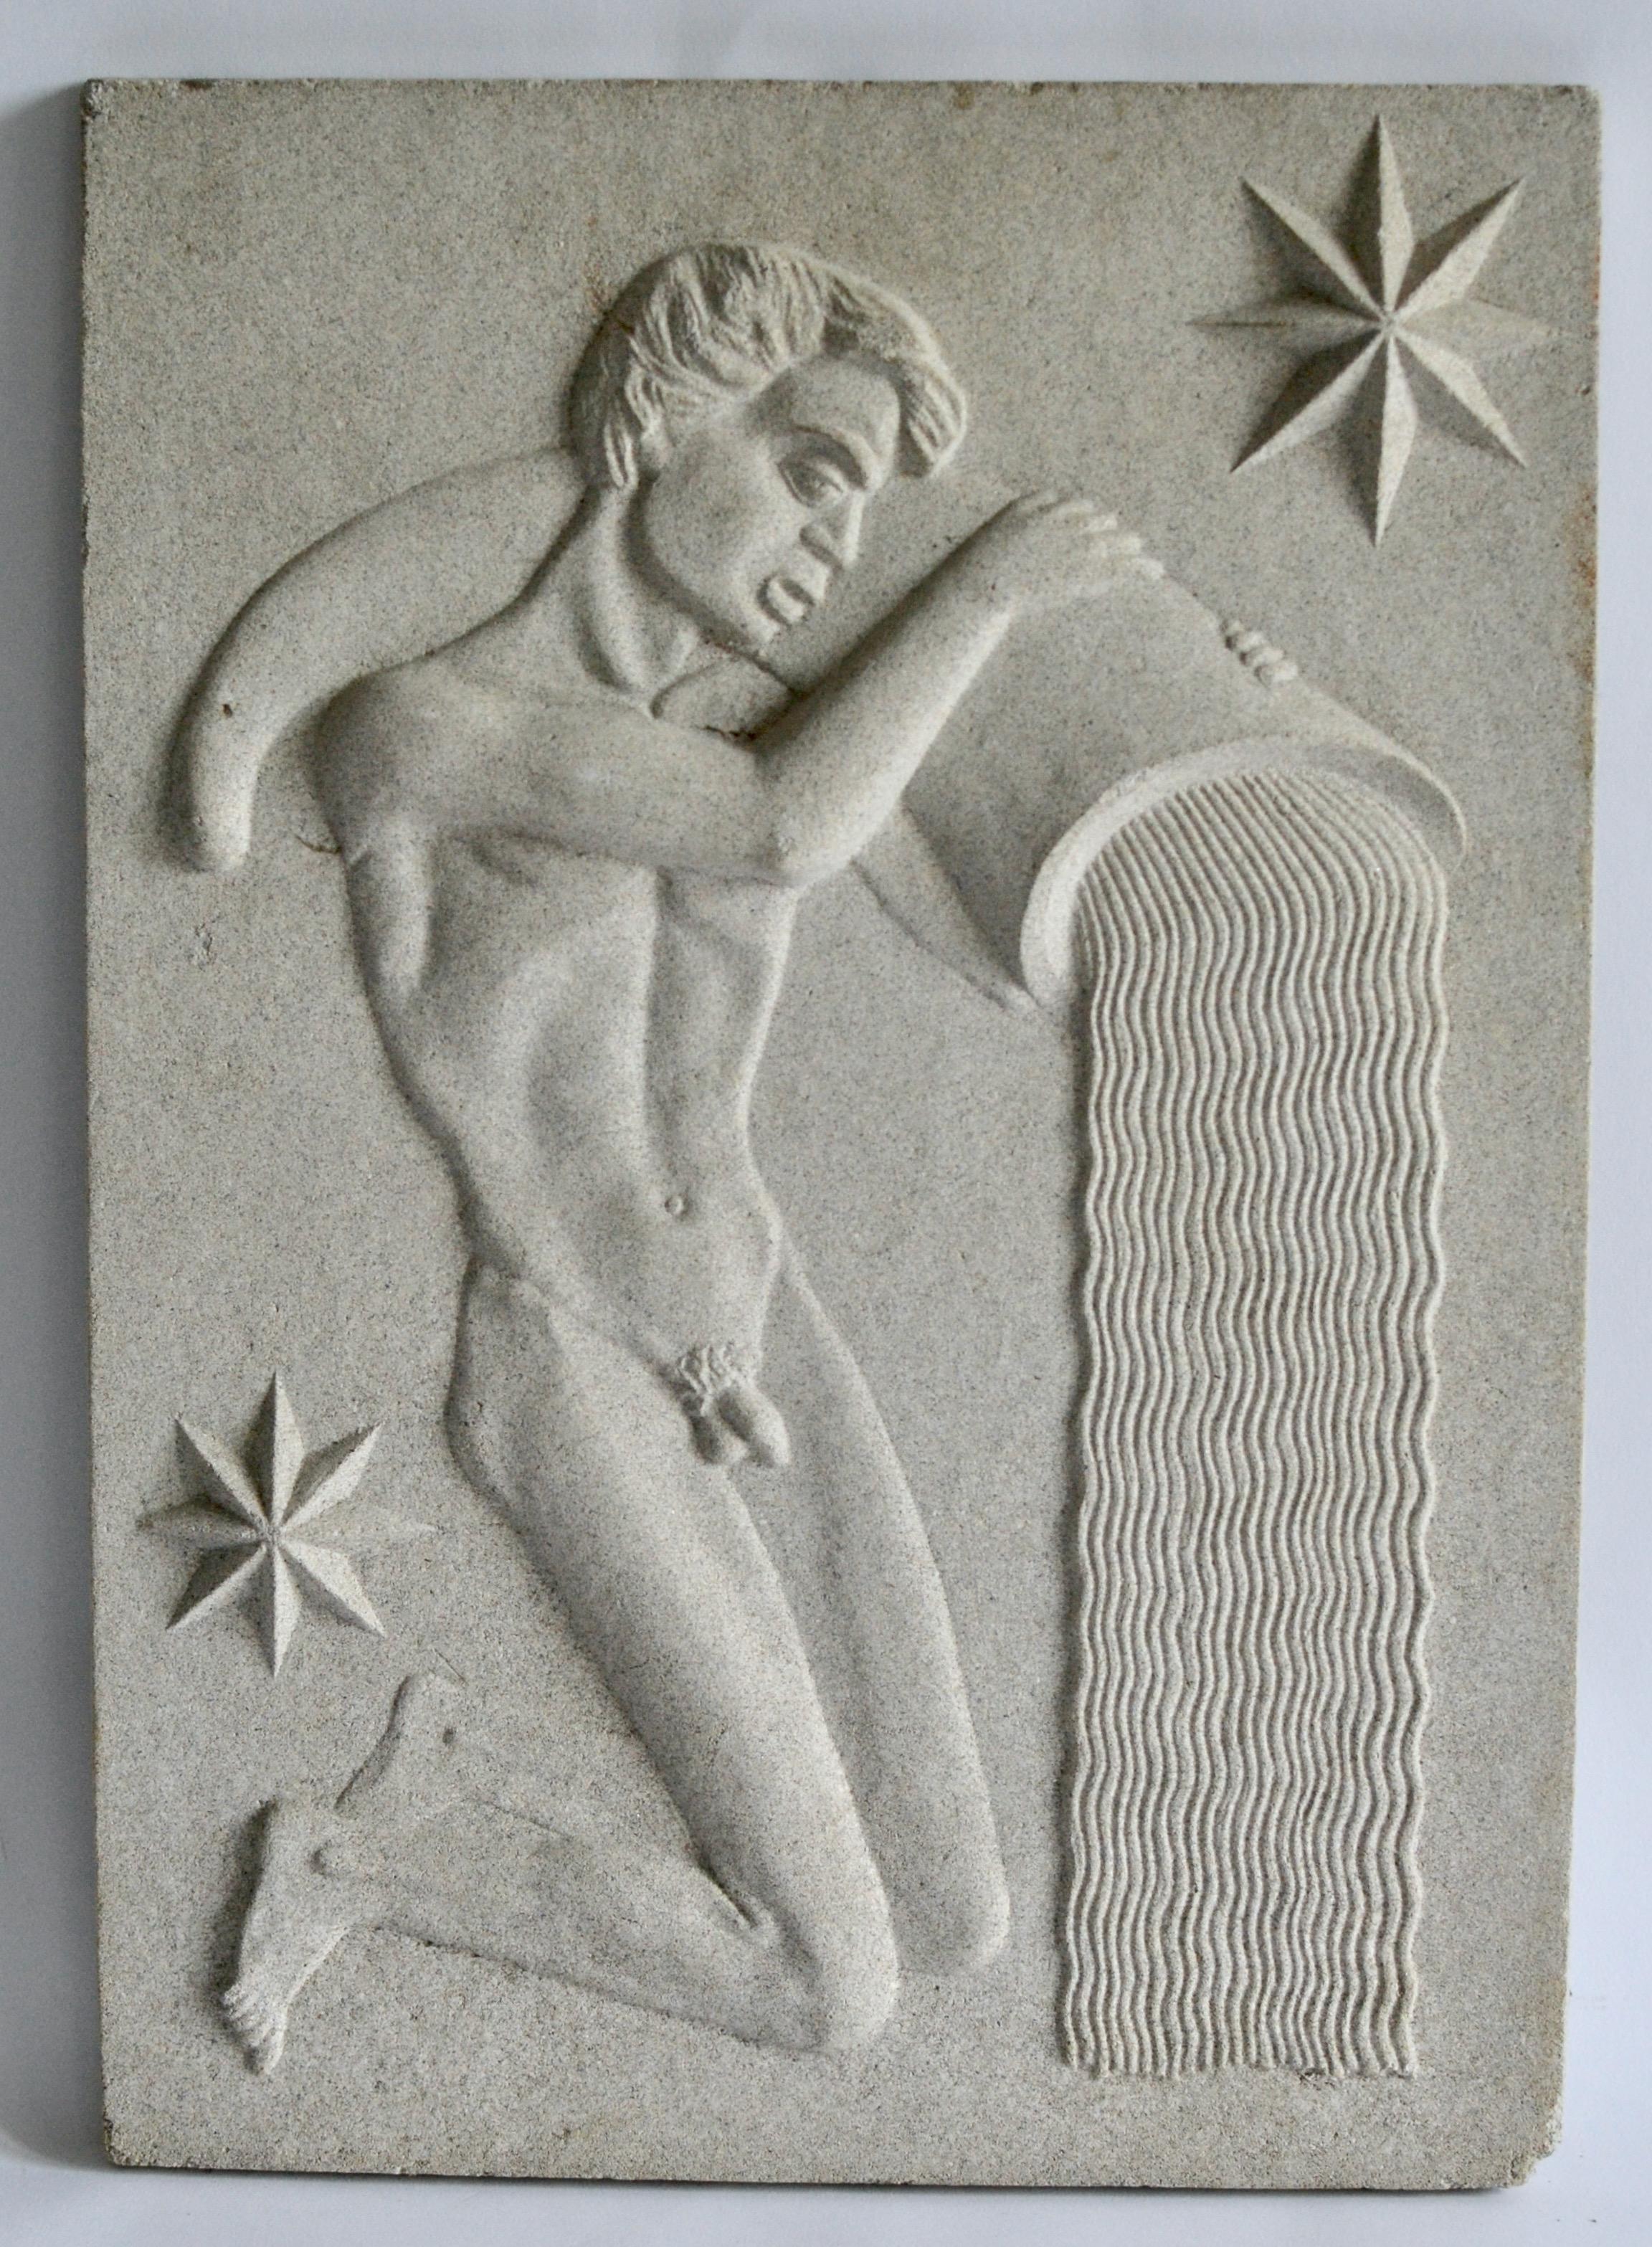 Cast Eight Zodiac Relief Signs, Artificial Stone, c. 1940